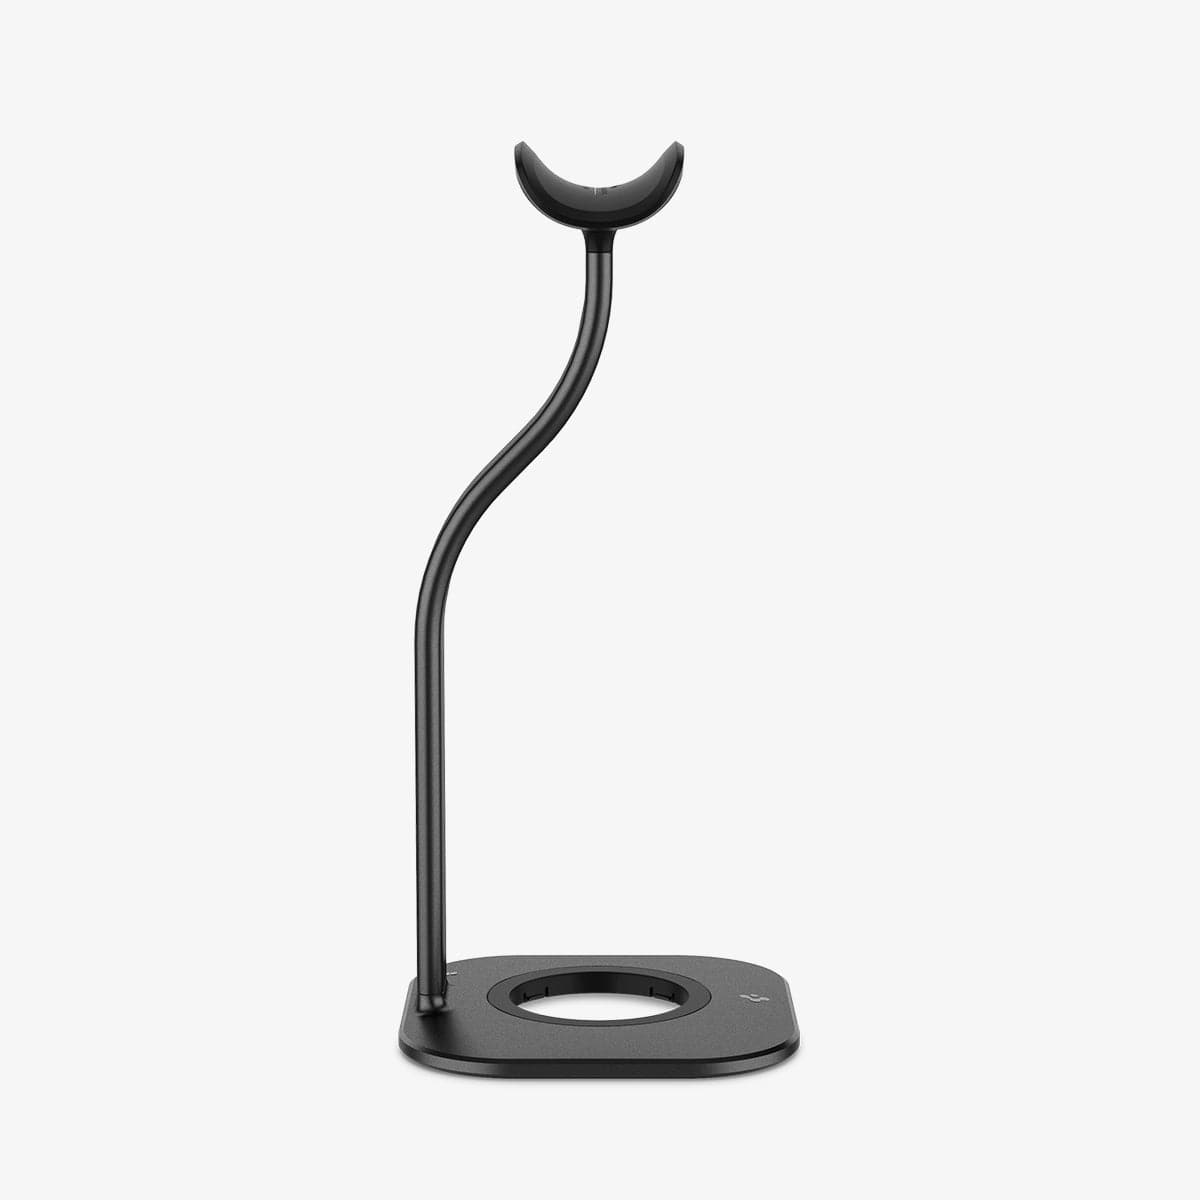 AMP02818 - Apple Airpods Max MagFit Stand in black showing the side